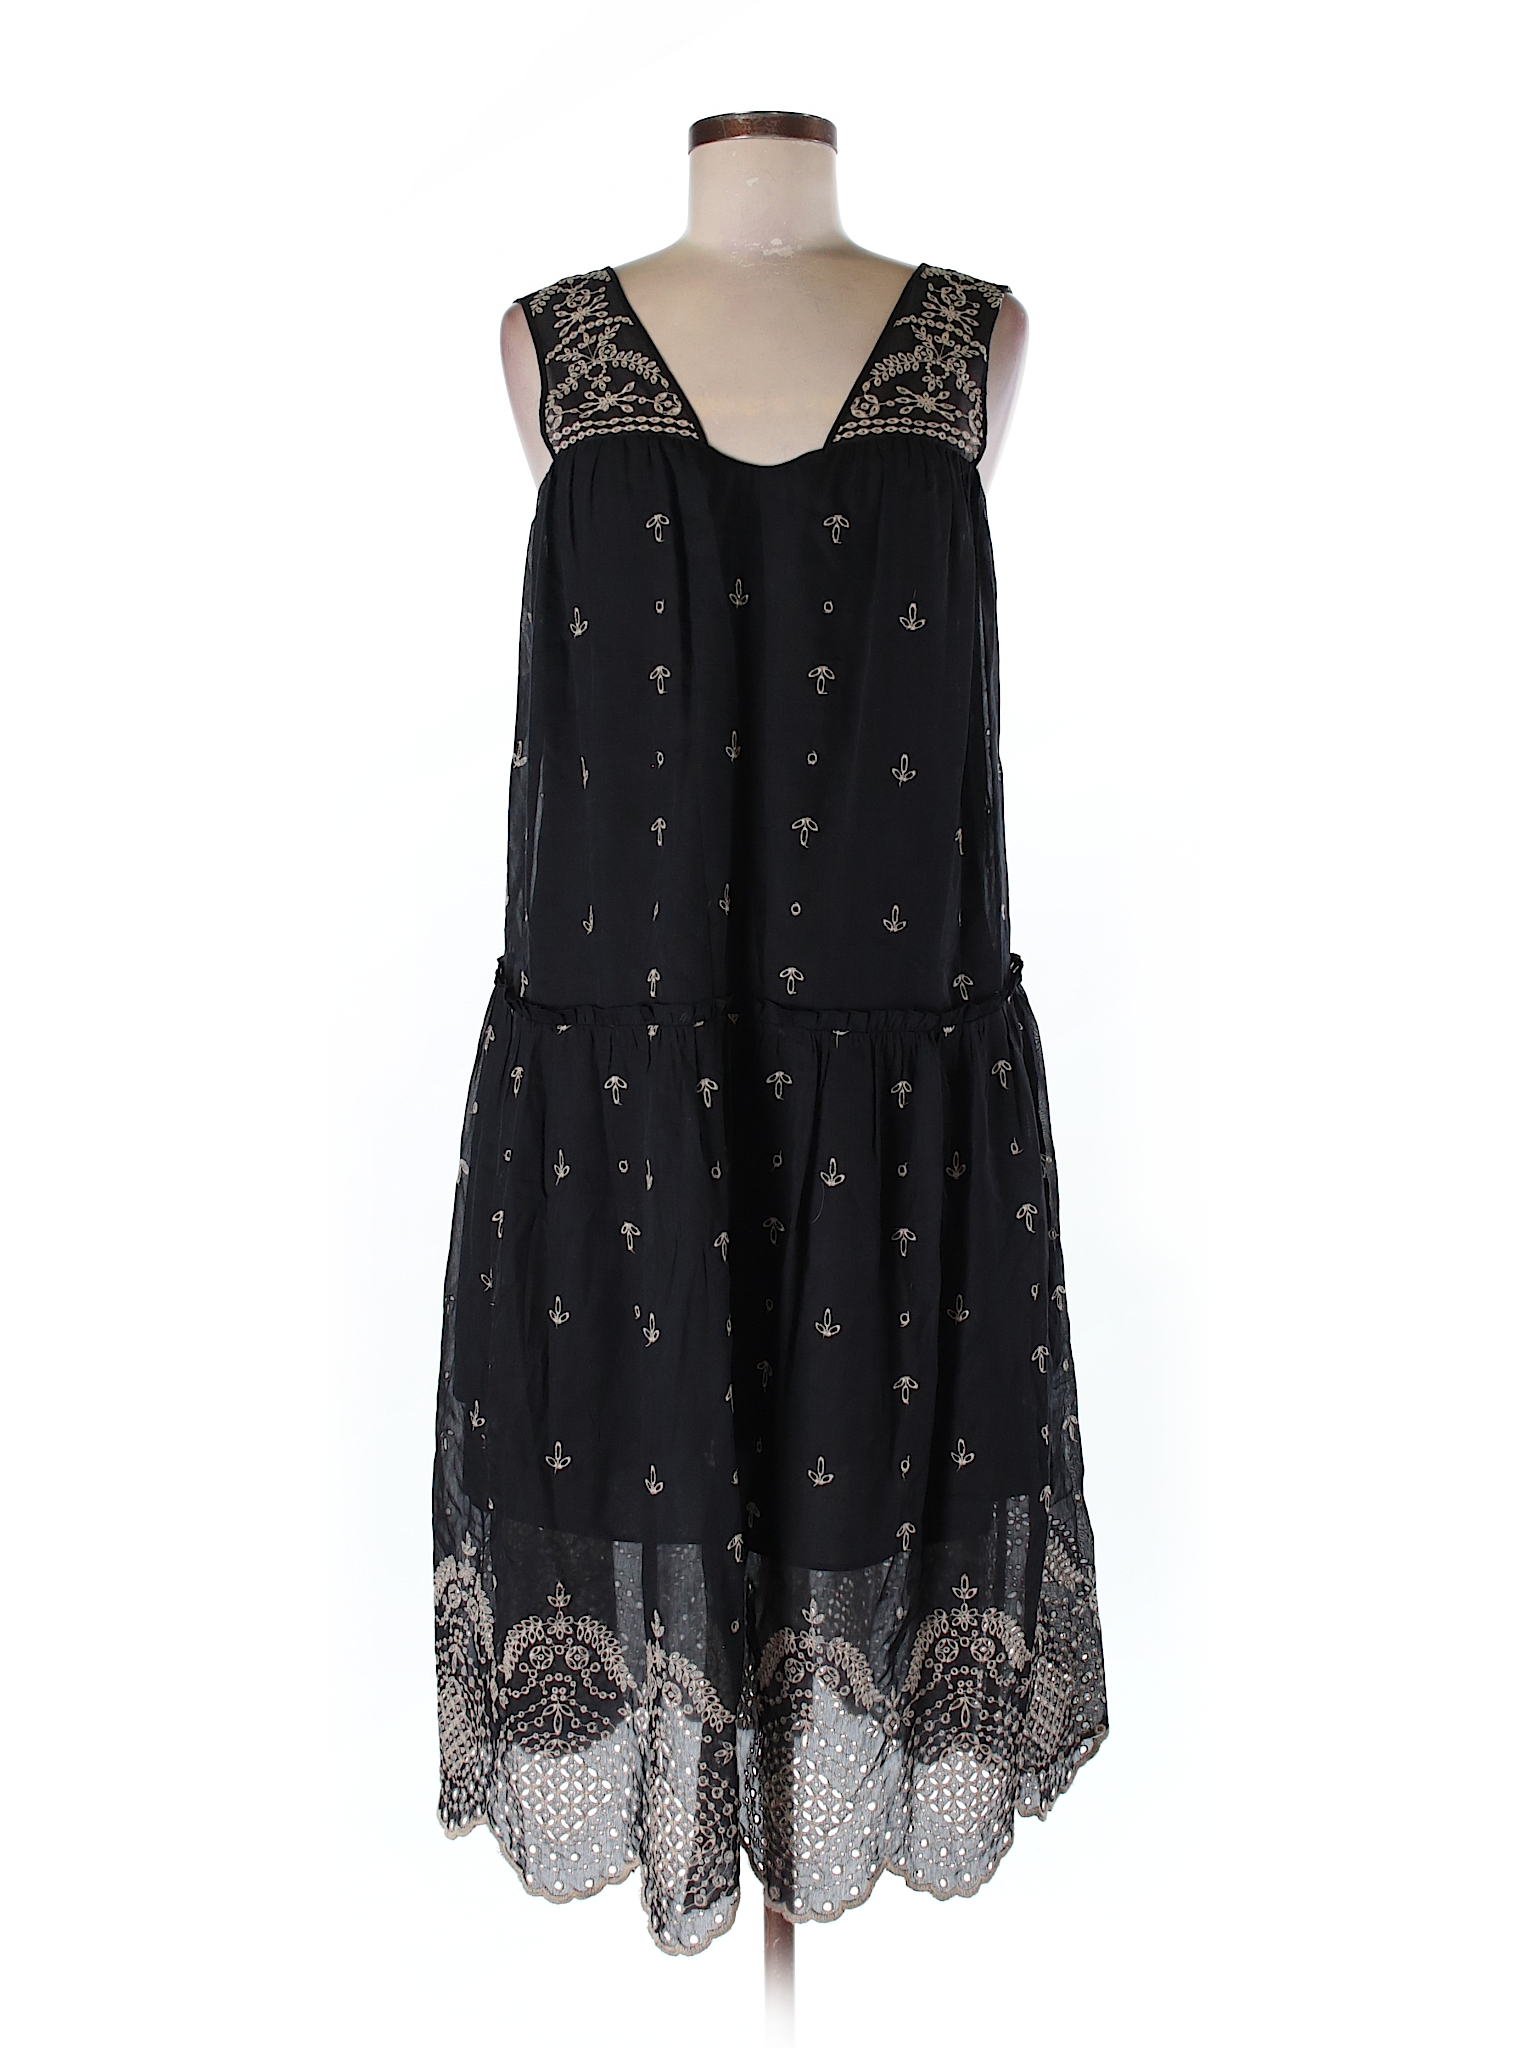 Bcbgmaxazria Casual Dress - 94% off only on thredUP